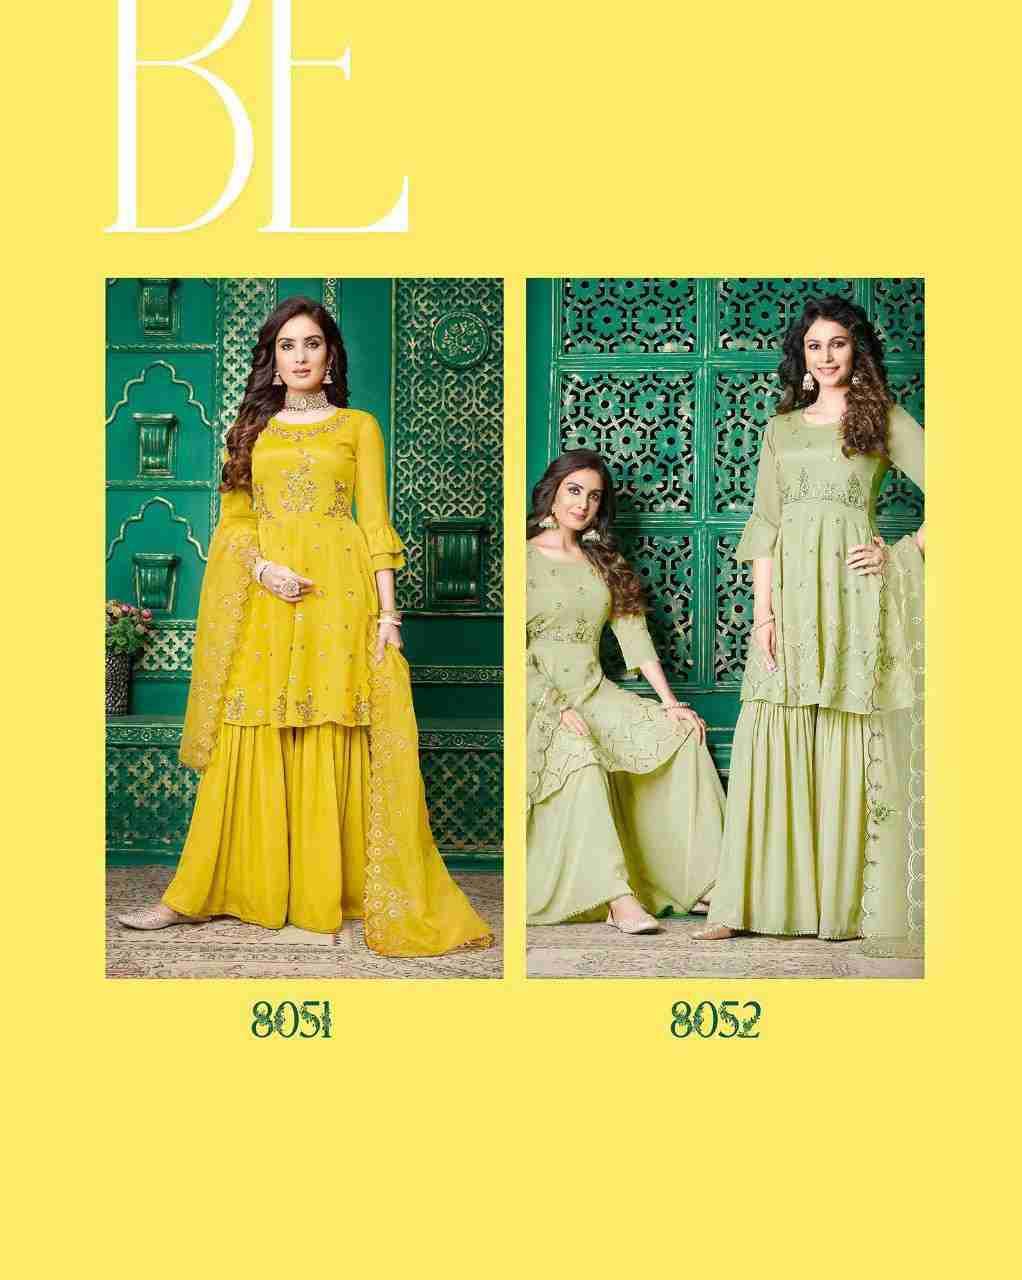 Eminent By Lily And Lali 8051 To 8054 Series Beautiful Colorful Stylish Fancy Casual Wear & Ethnic Wear Chinnon Chiffon Embroidered Dresses At Wholesale Price